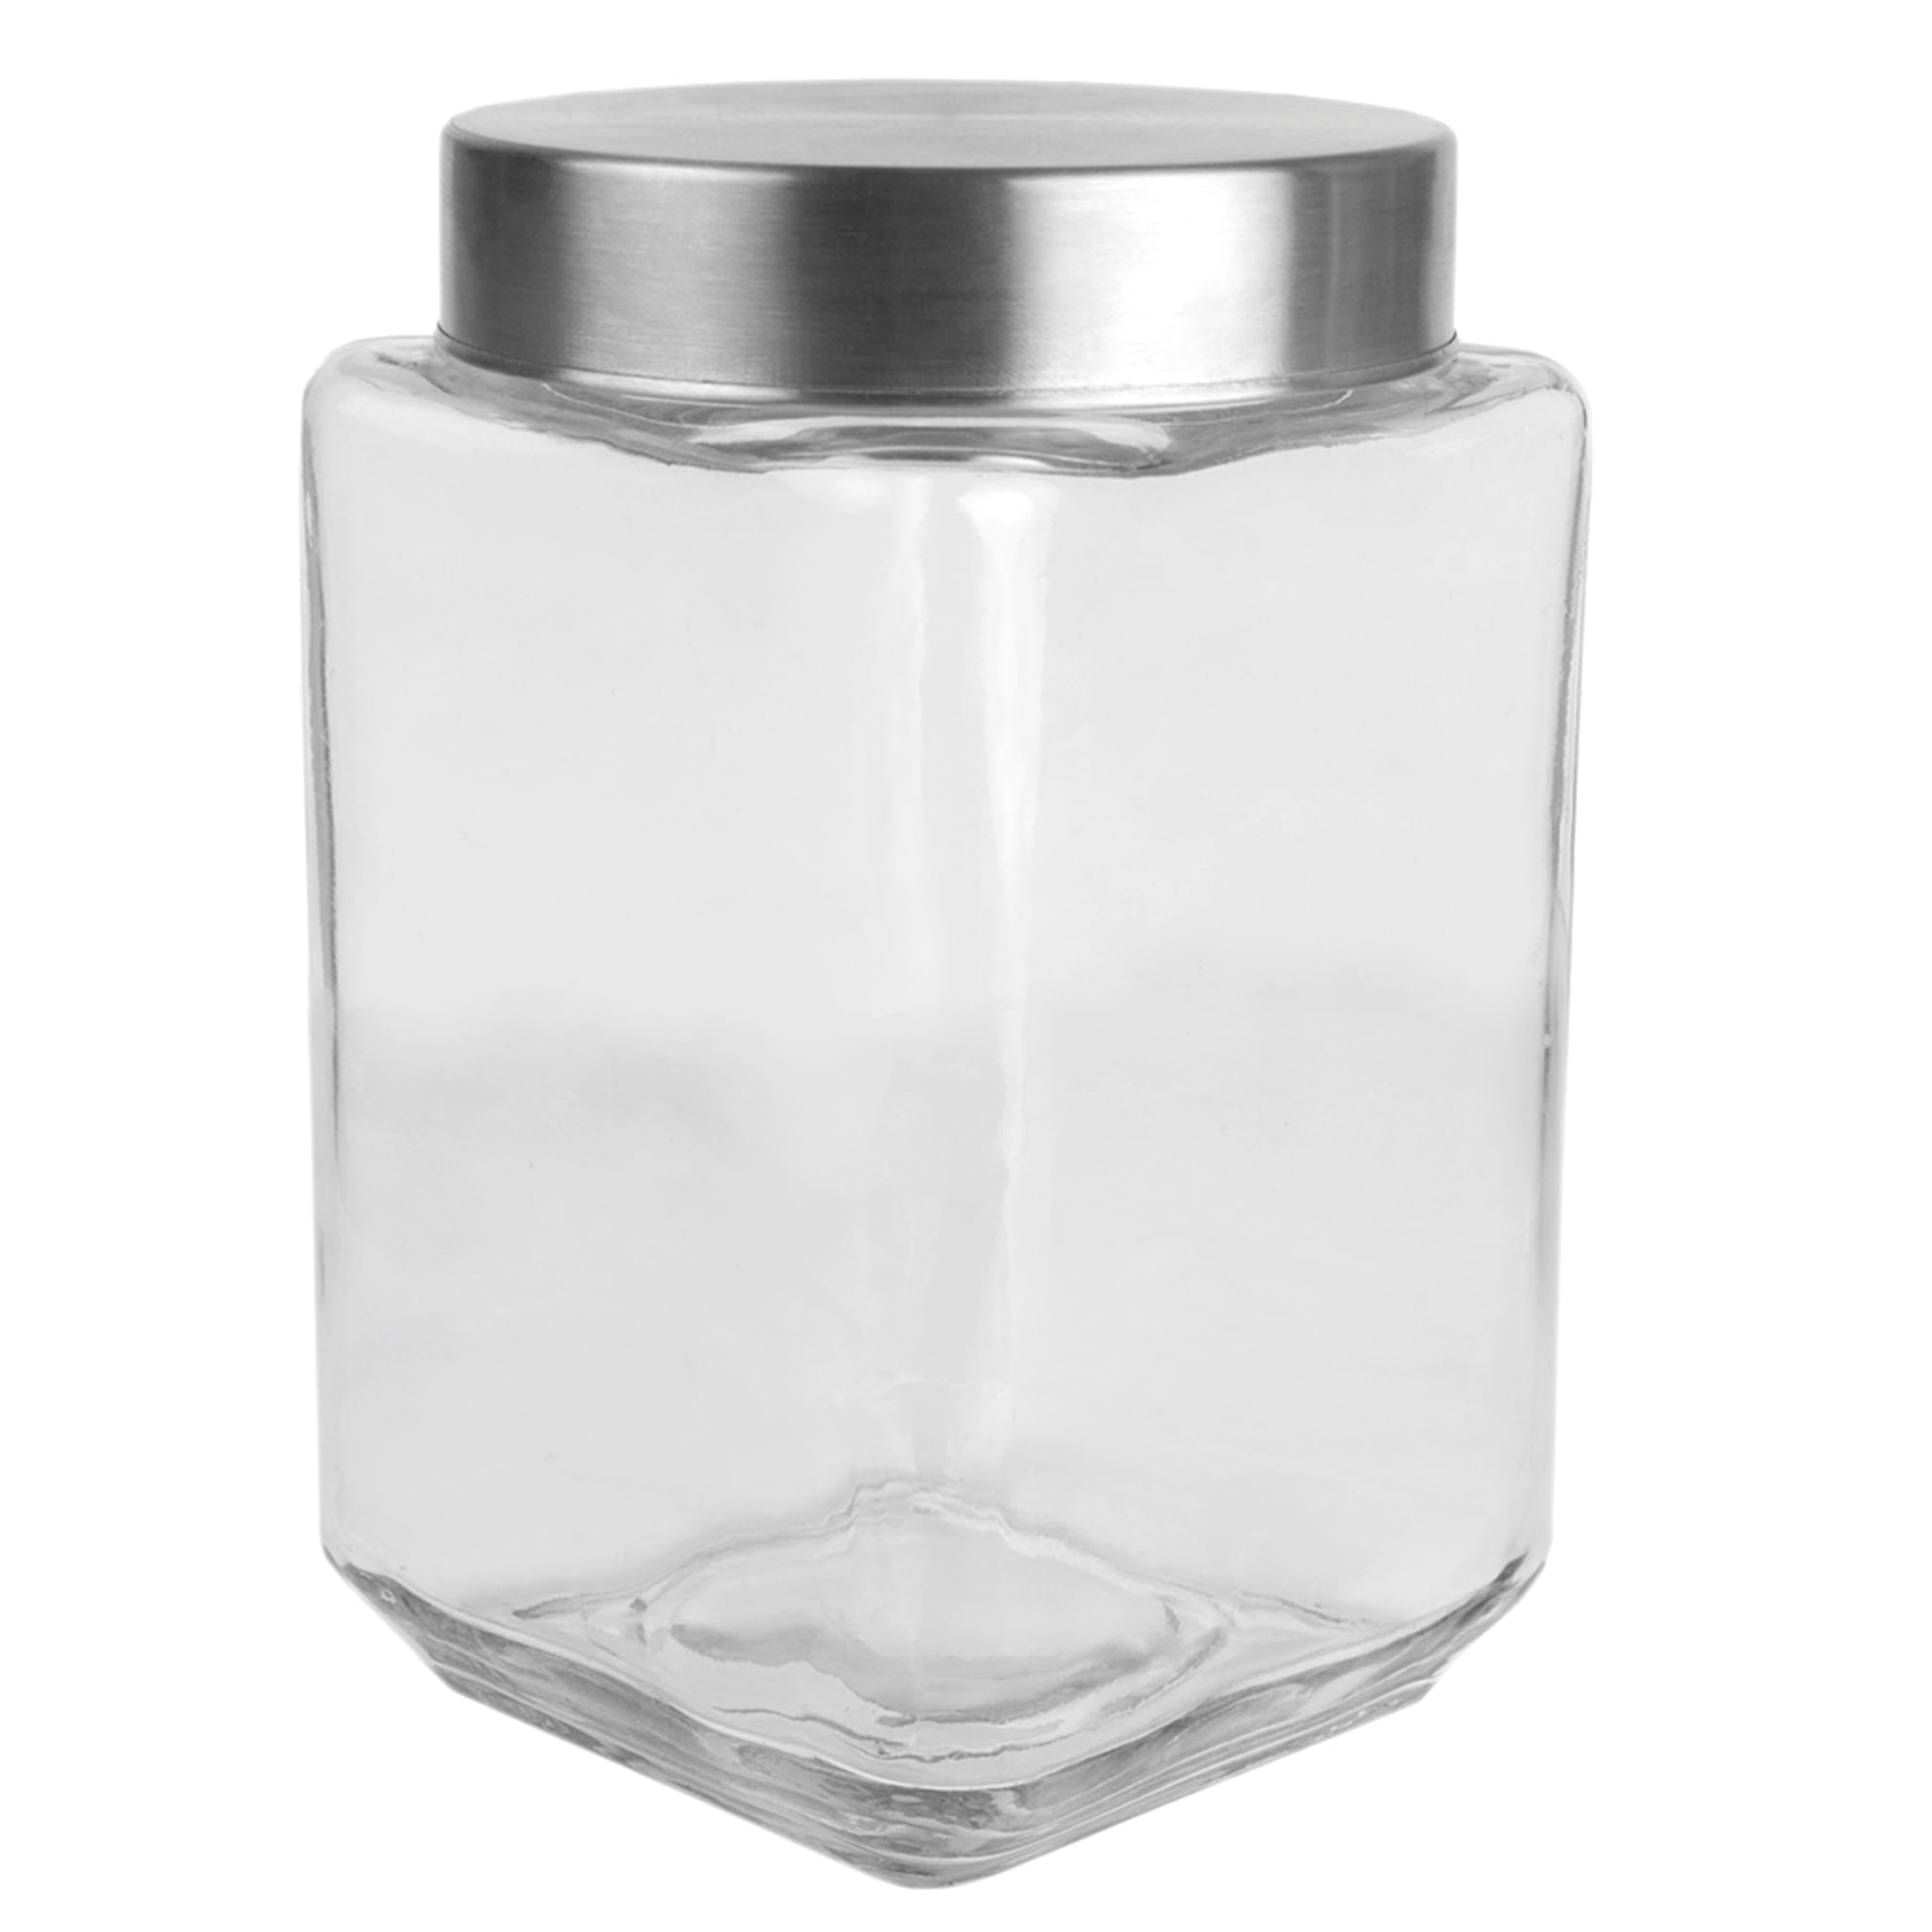 Home Basics 4 Piece Canister Set with Stainless Steel Lids $15.00 EACH, CASE PACK OF 6